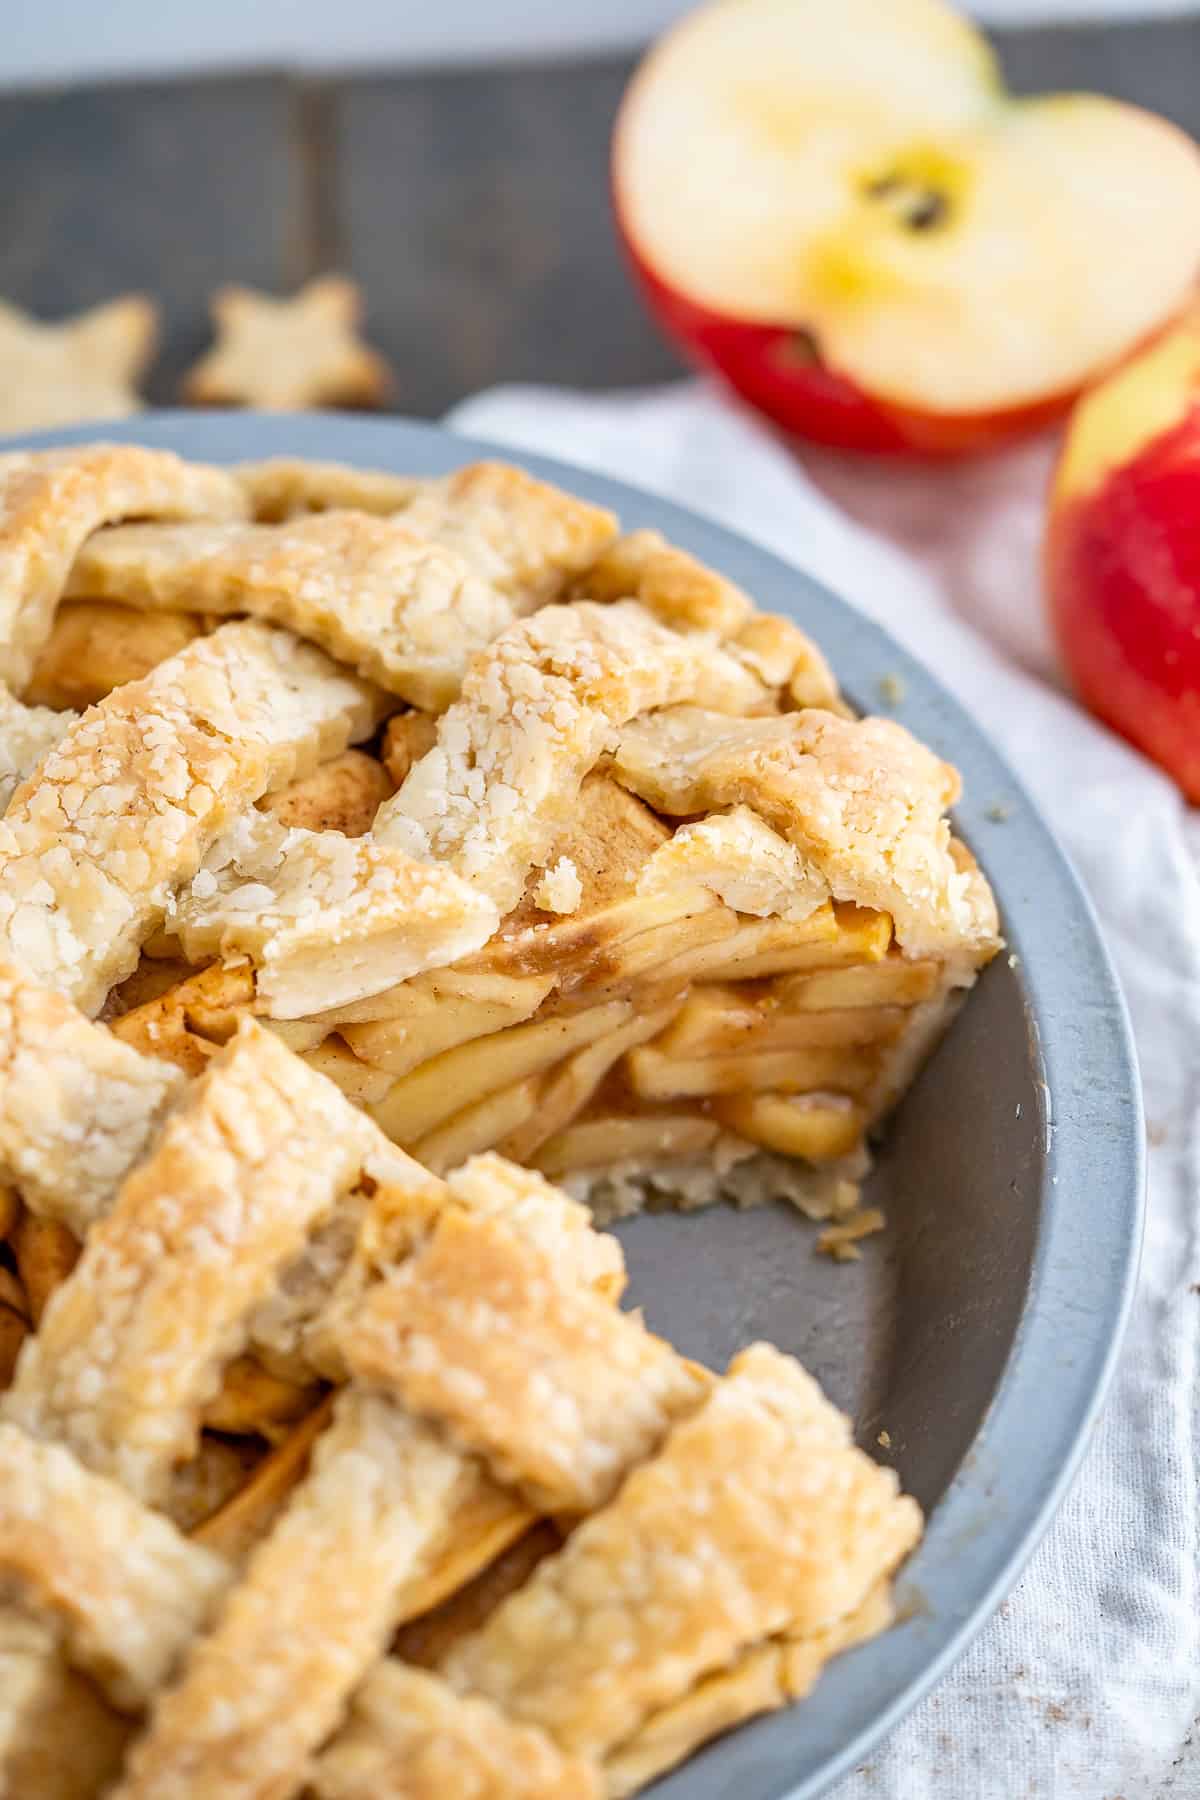 Side view of a gluten-free apple pie to show the layers of apple filling and lattice top crust.